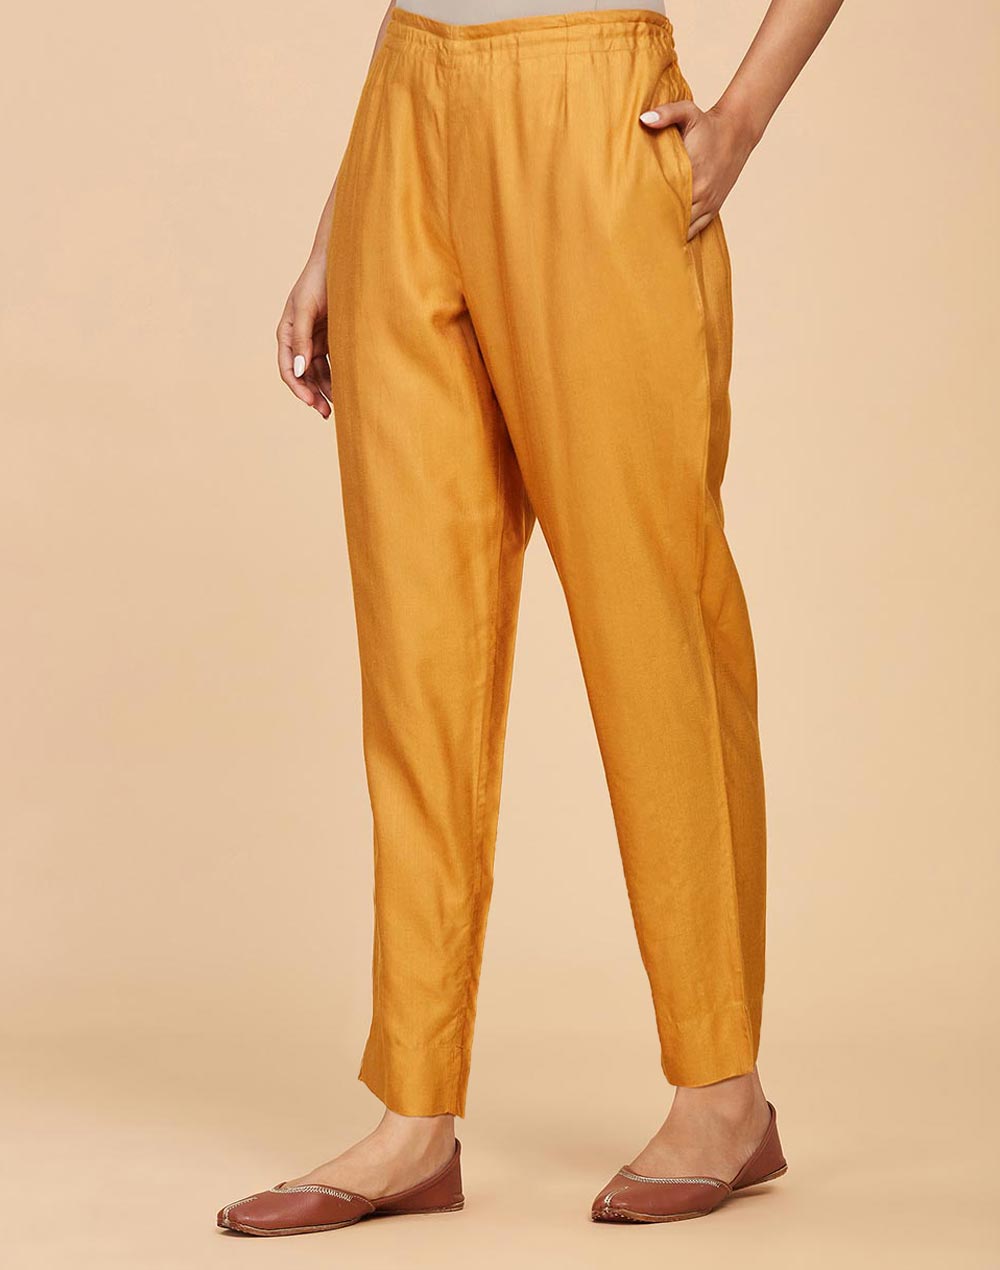 Buy Yellow Ankle Pant Cotton Silk for Best Price, Reviews, Free Shipping